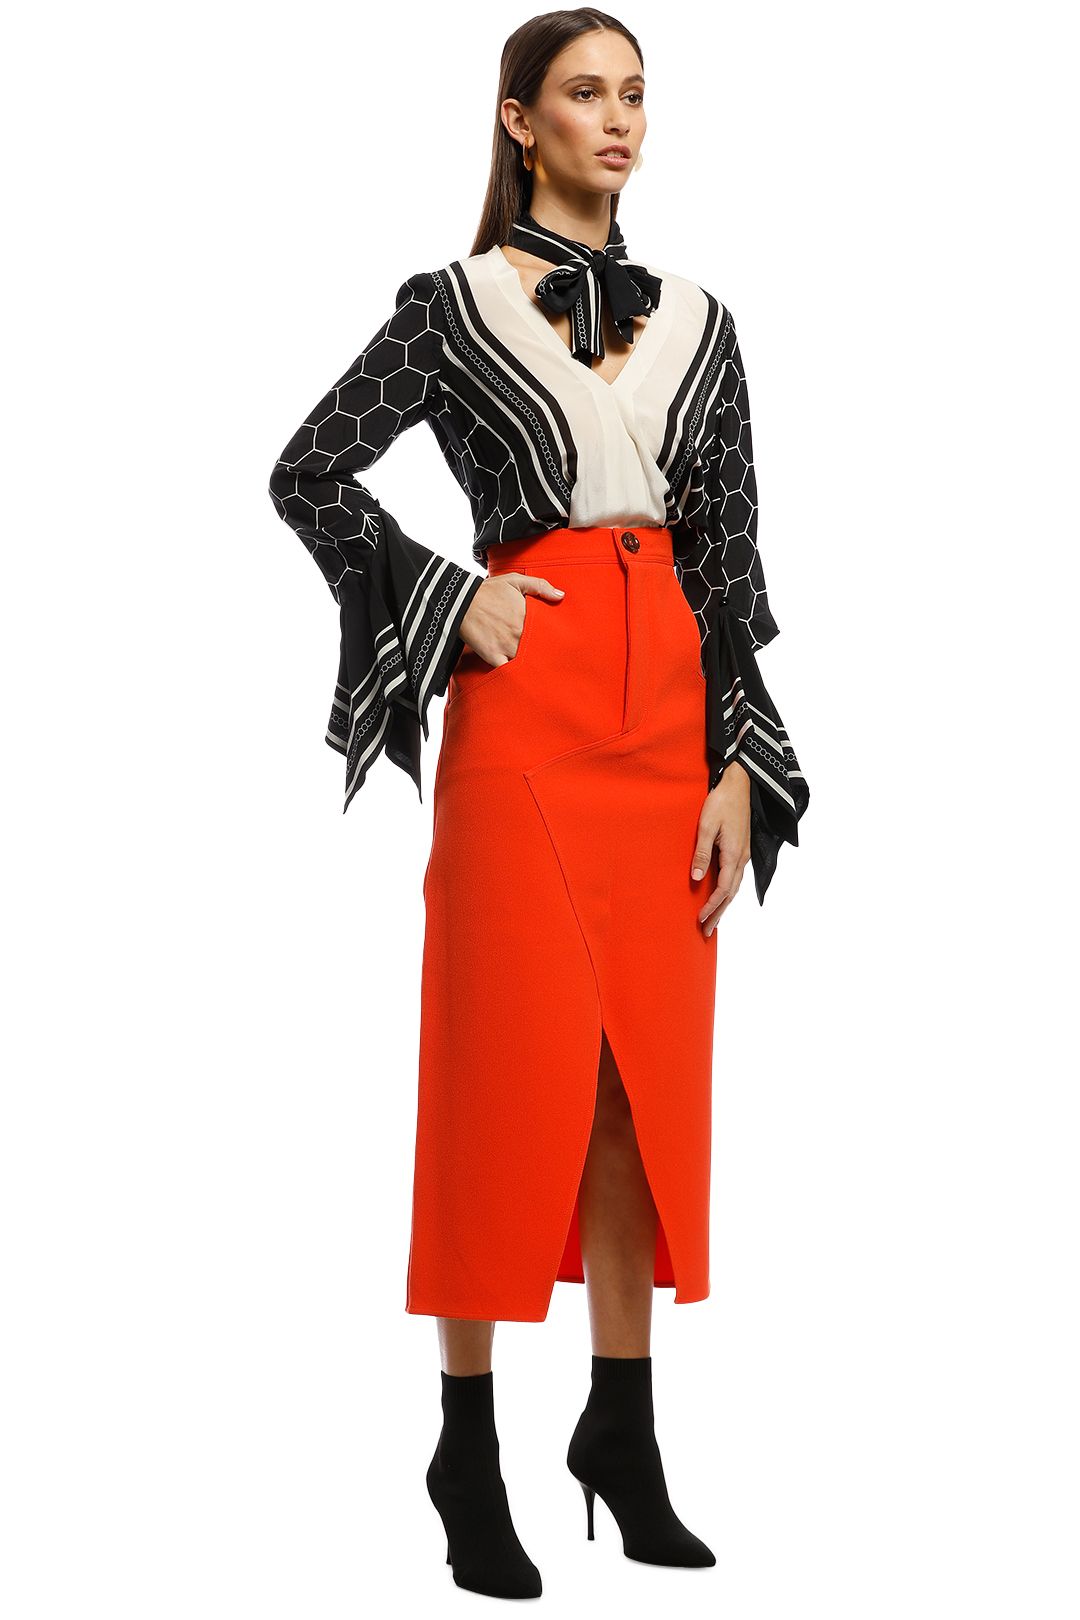 CMEO Collective - High Heart Skirt - Orange - Side